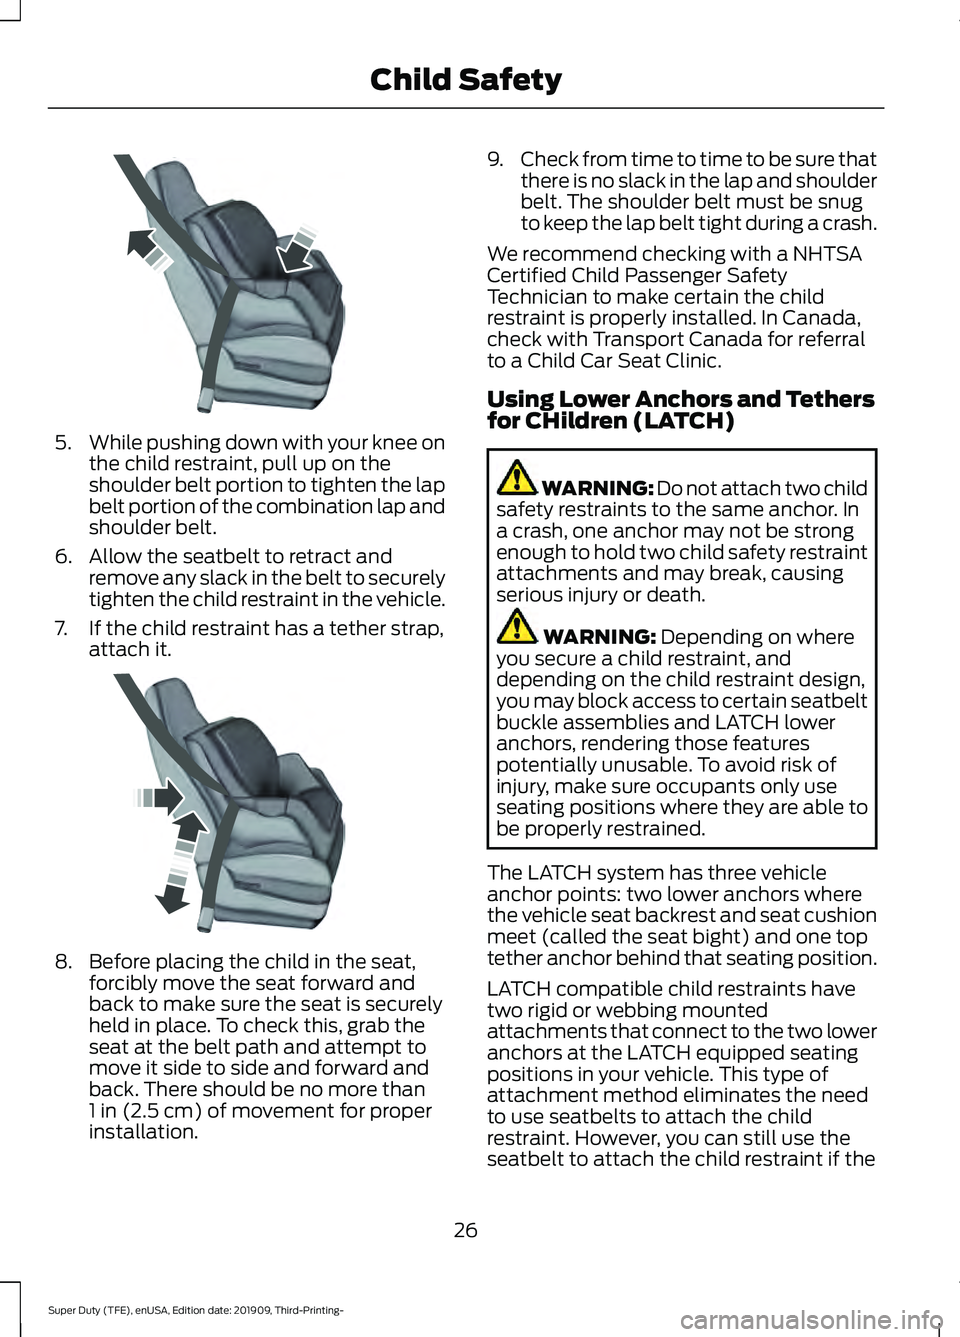 FORD F-550 2020 Owners Manual 5.
While pushing down with your knee on
the child restraint, pull up on the
shoulder belt portion to tighten the lap
belt portion of the combination lap and
shoulder belt.
6. Allow the seatbelt to ret